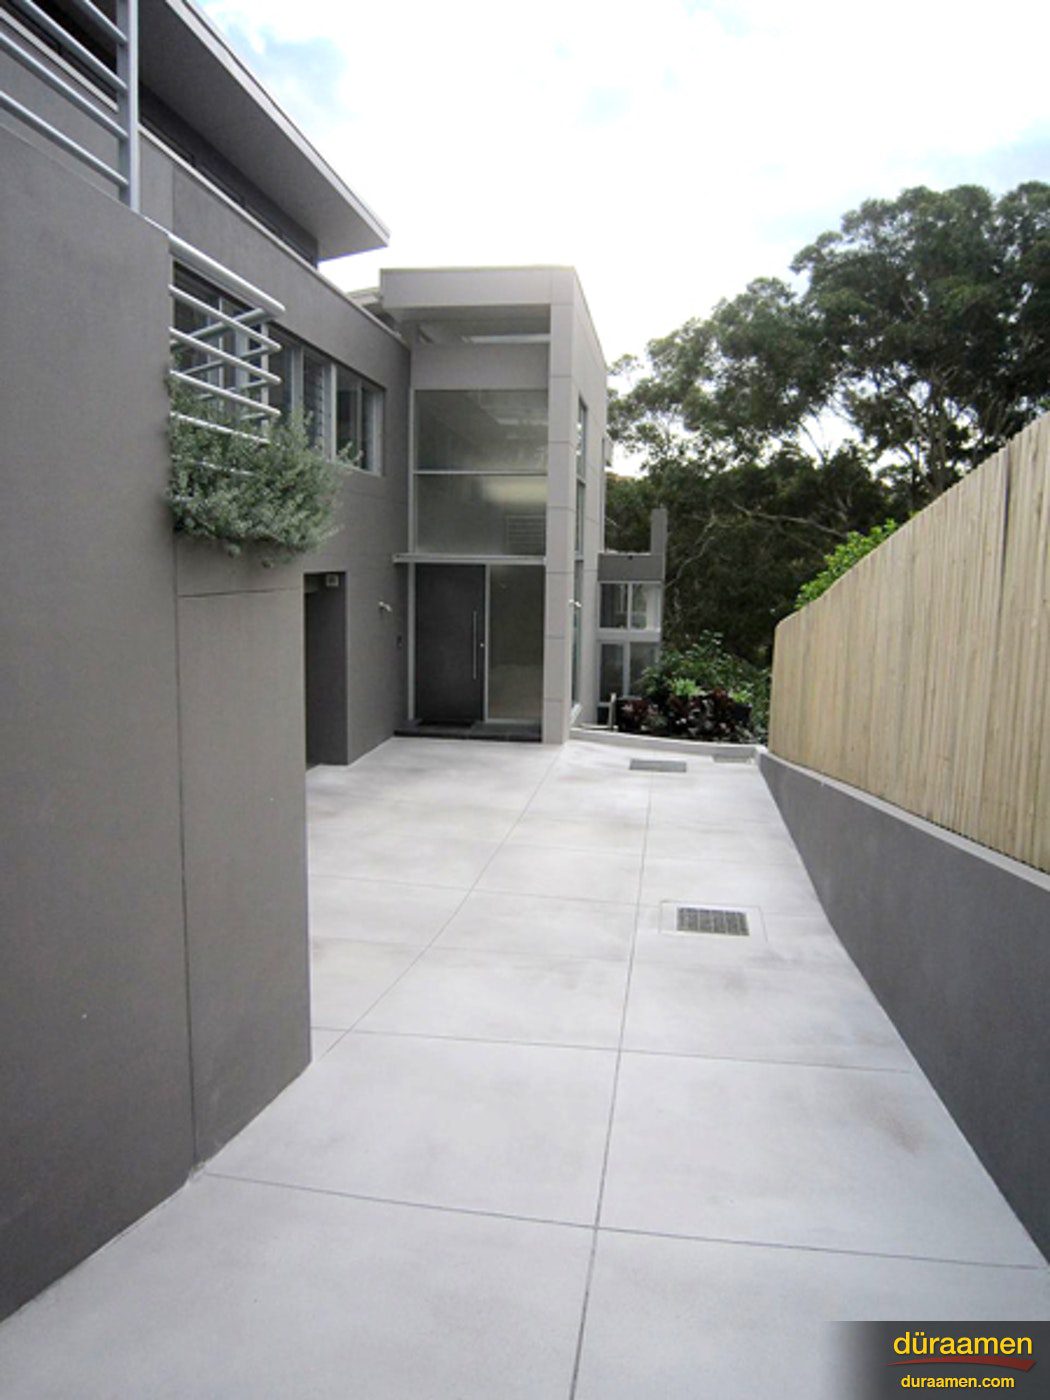 This modern looking Australian home features a concrete overlay driveway Concrete Driveway Coatings | Duraamen | Duraamen Engineered Products Inc